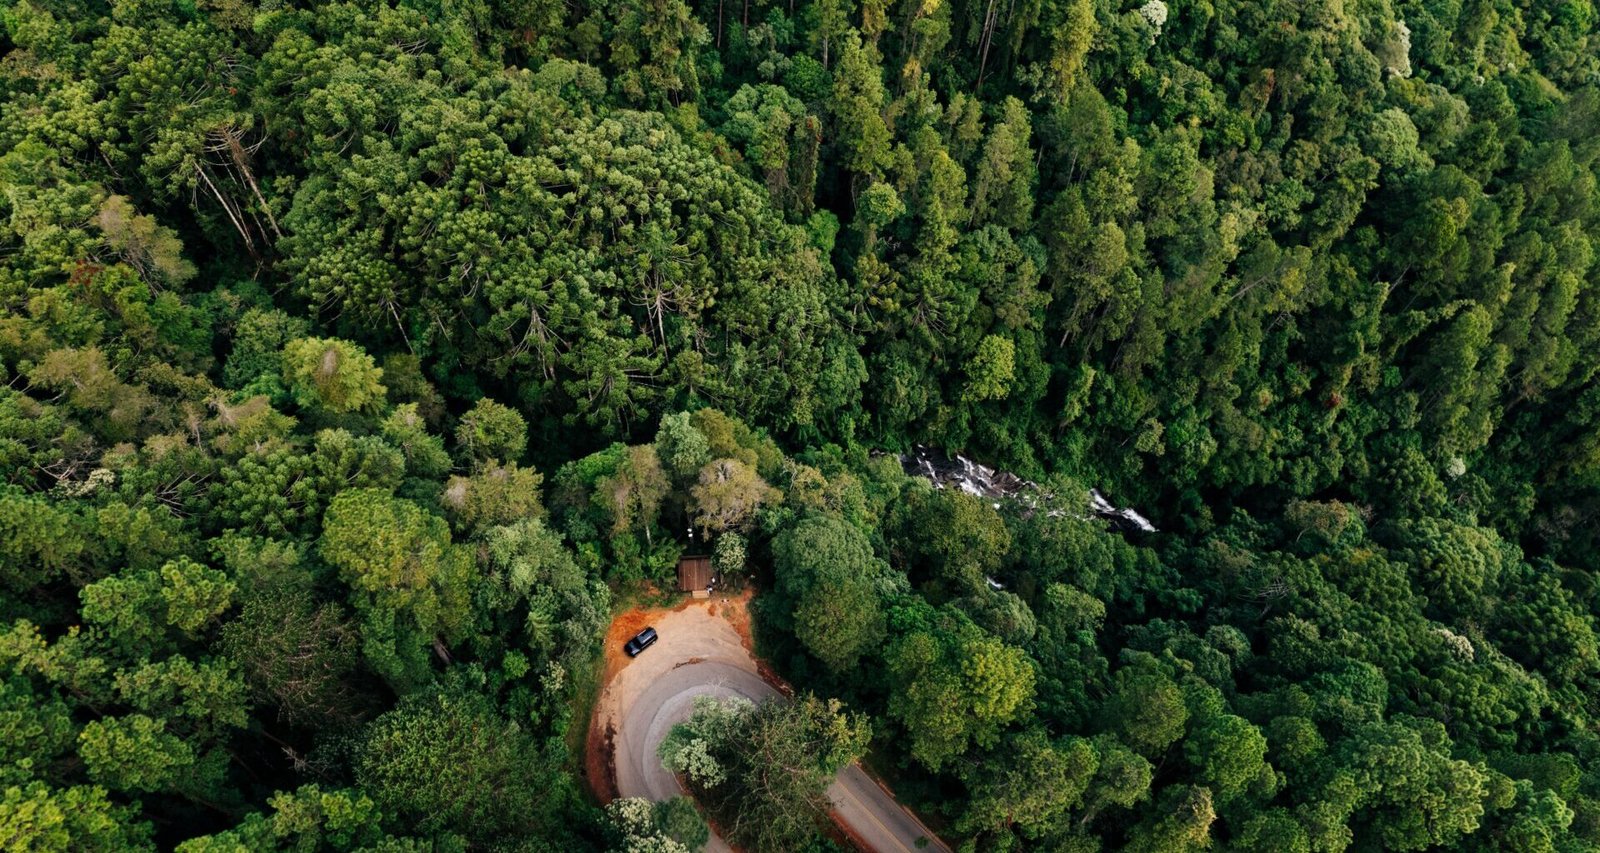 Lush Forest Ecosystems: Nature's Lungs at Work